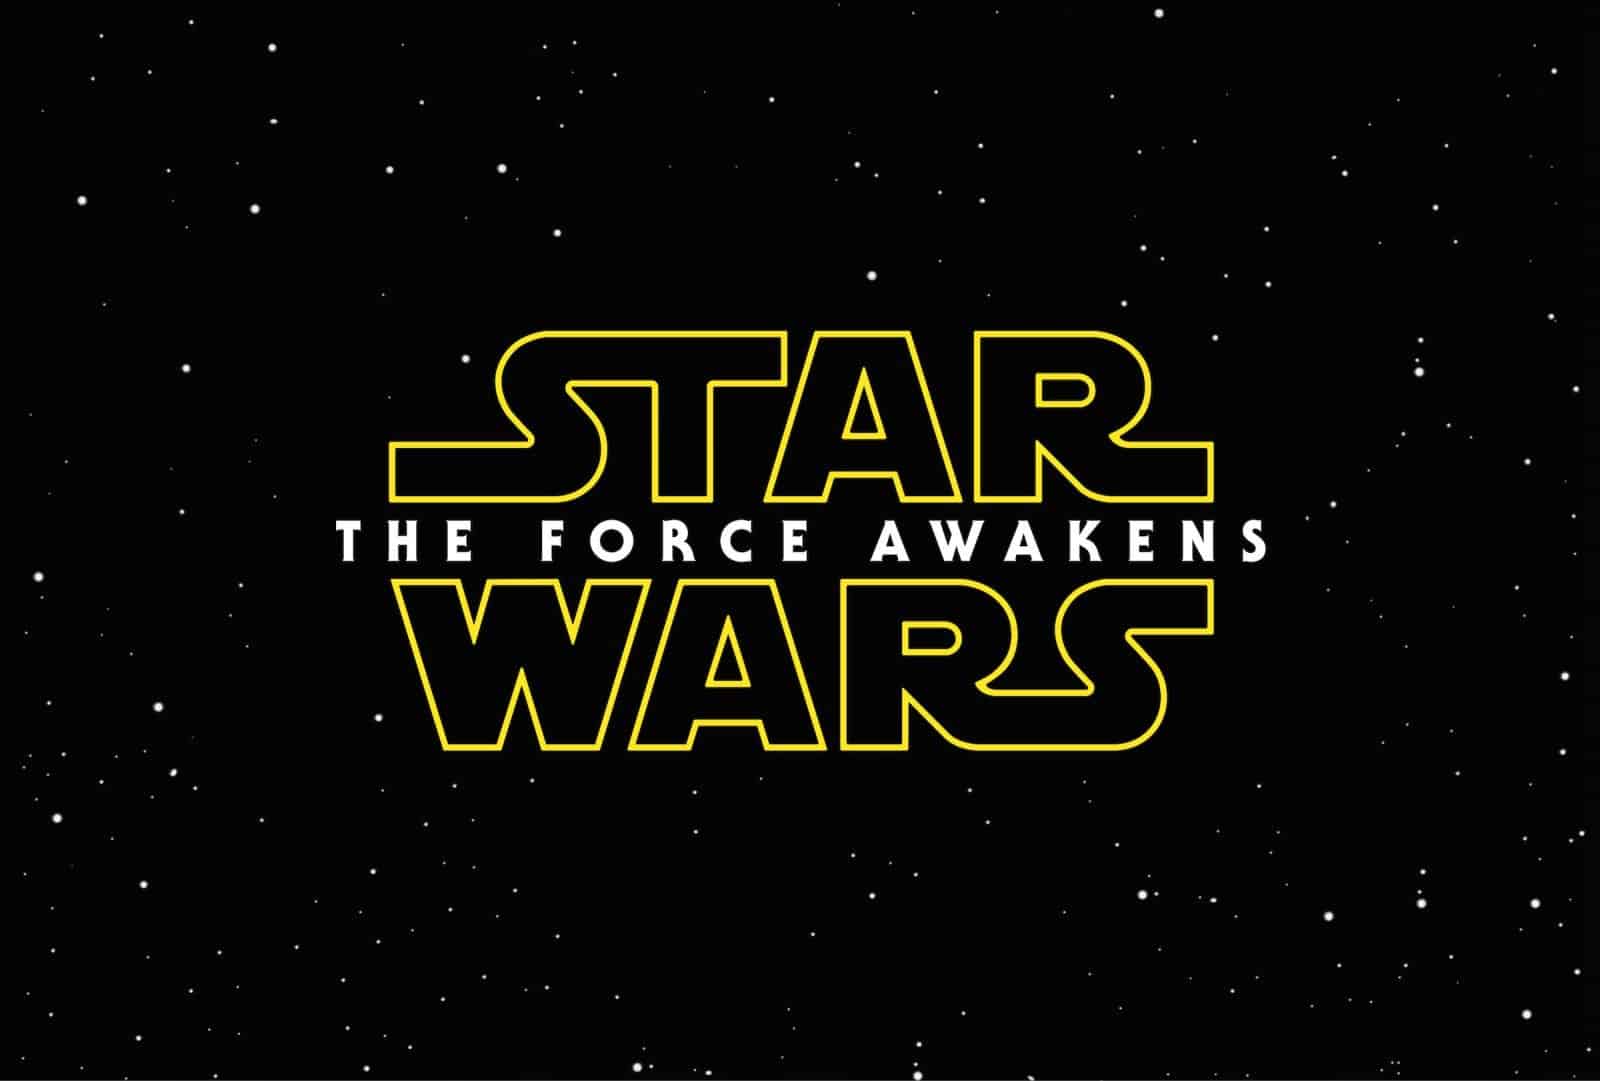 Star Wars VII The Force Awakens 33 - Opening